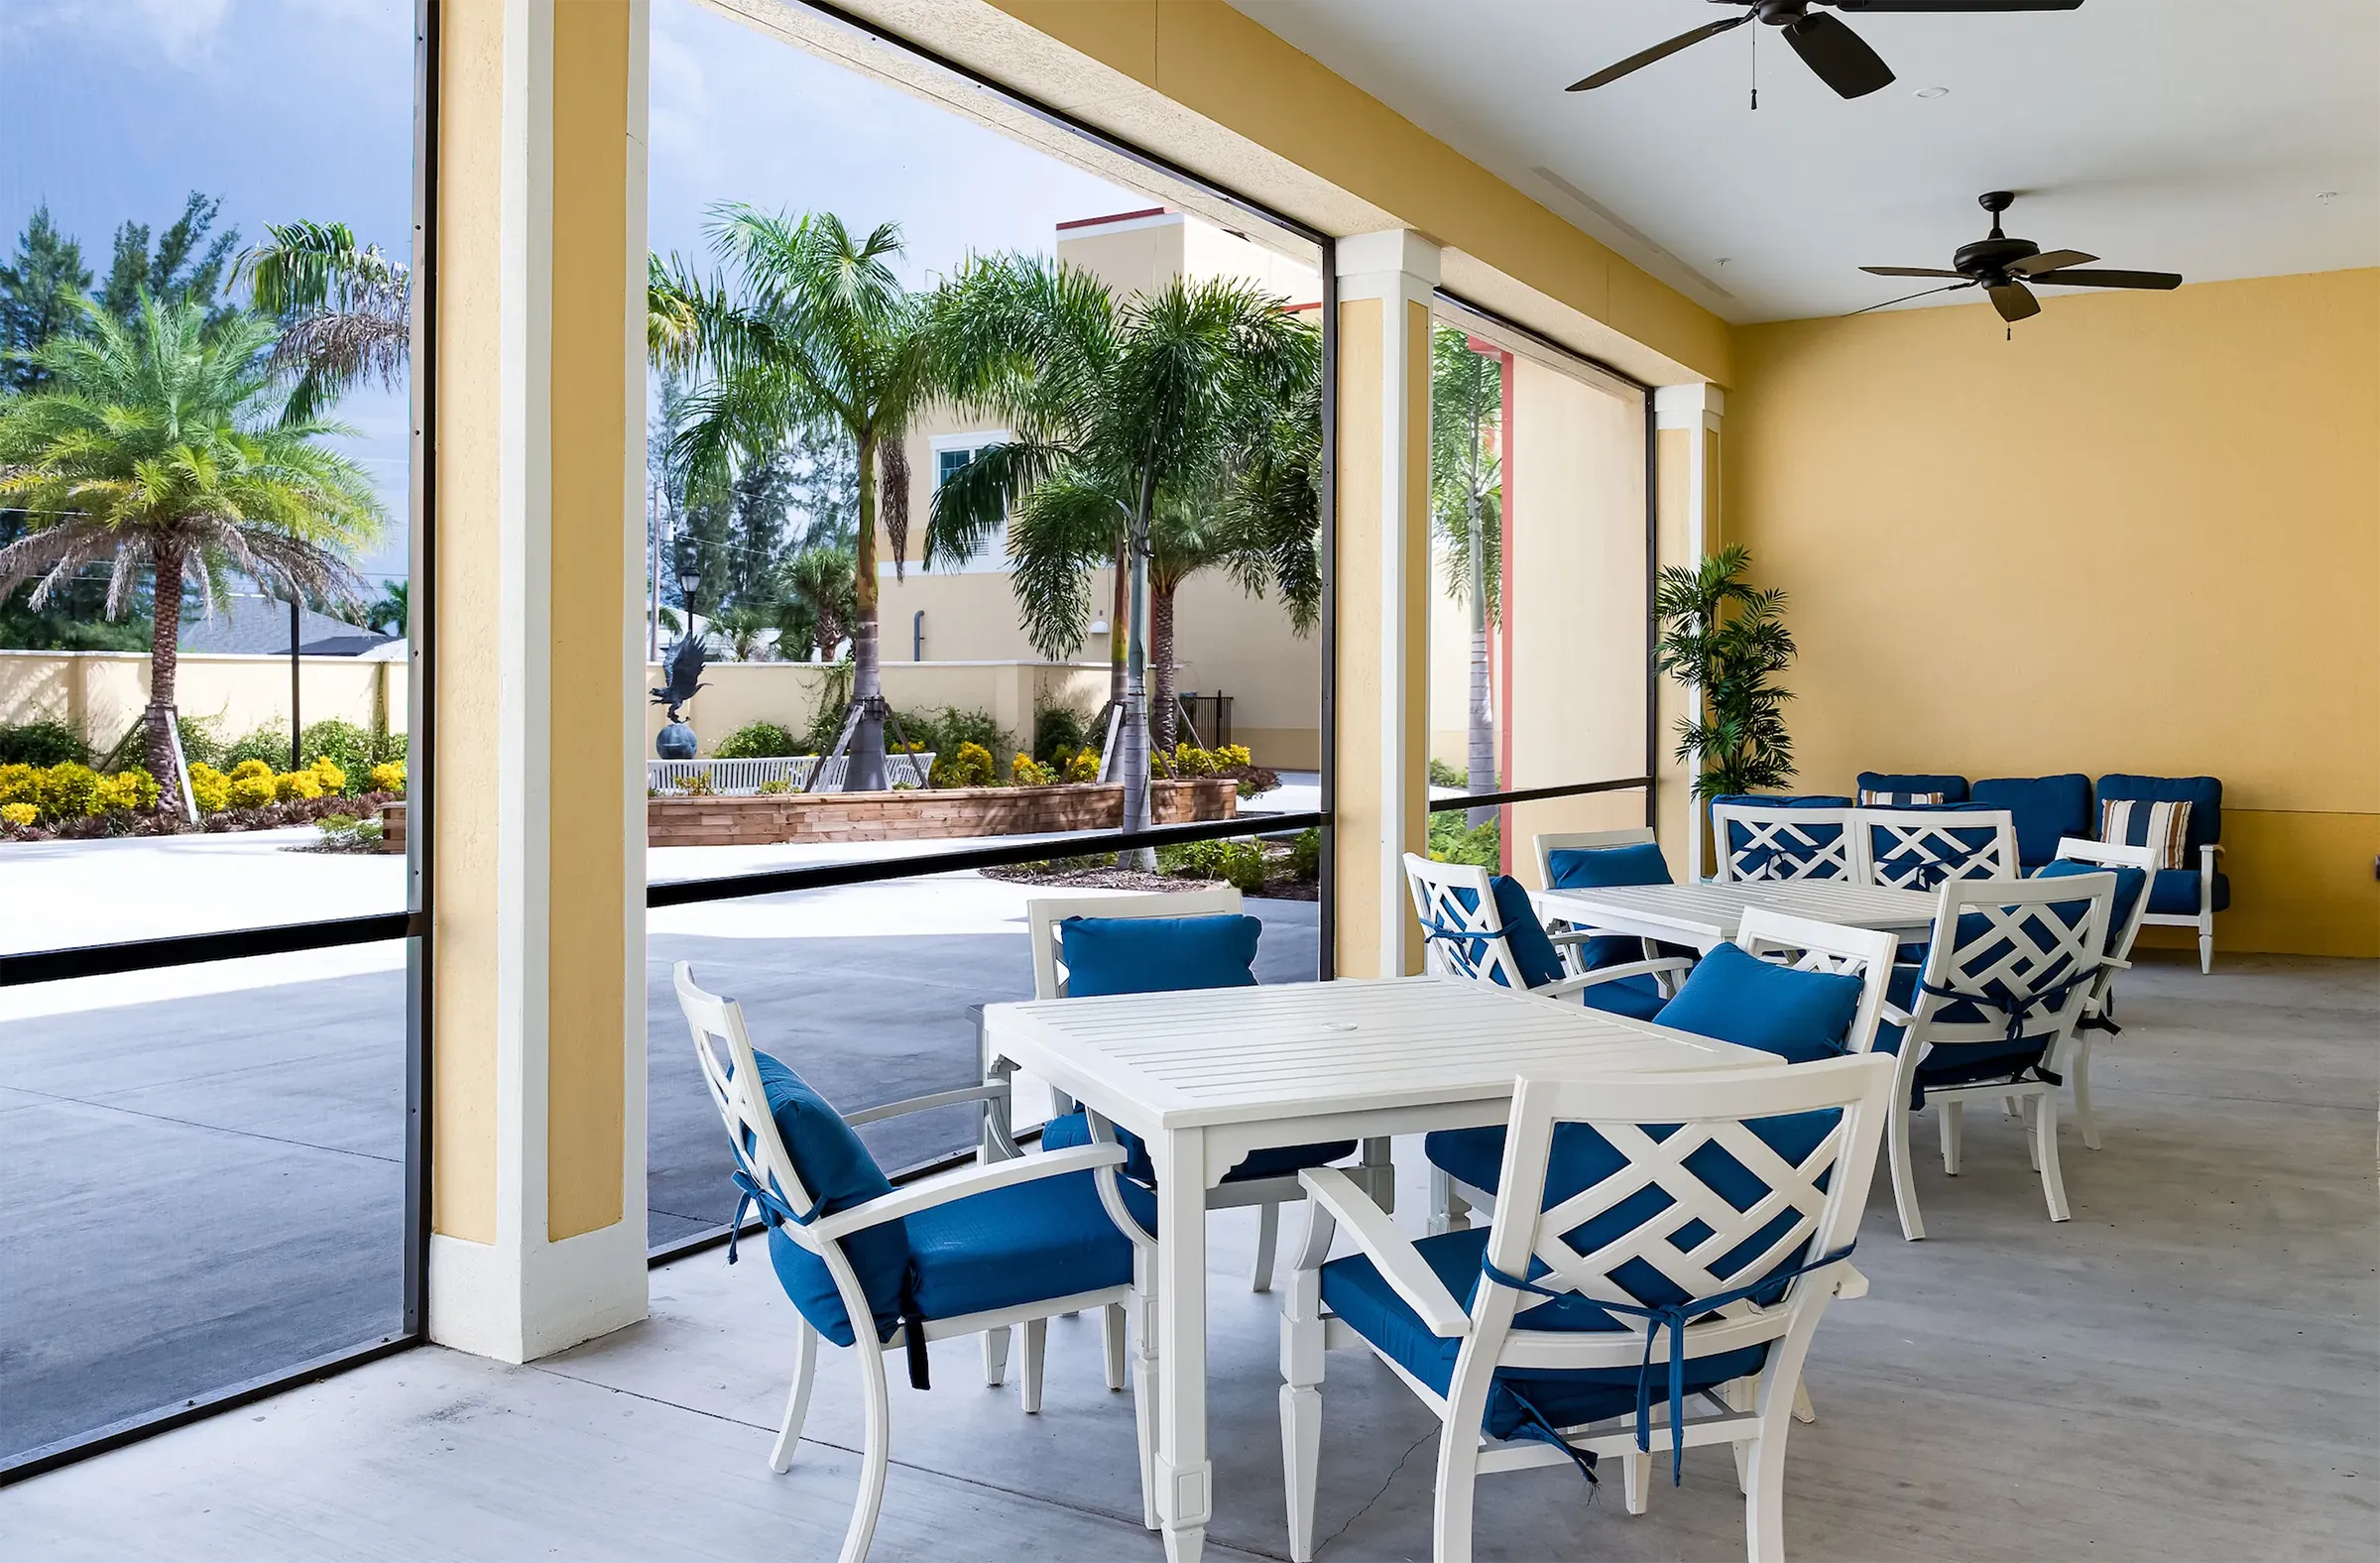 A covered patio with dining seating at The Gallery at Cape Coral.